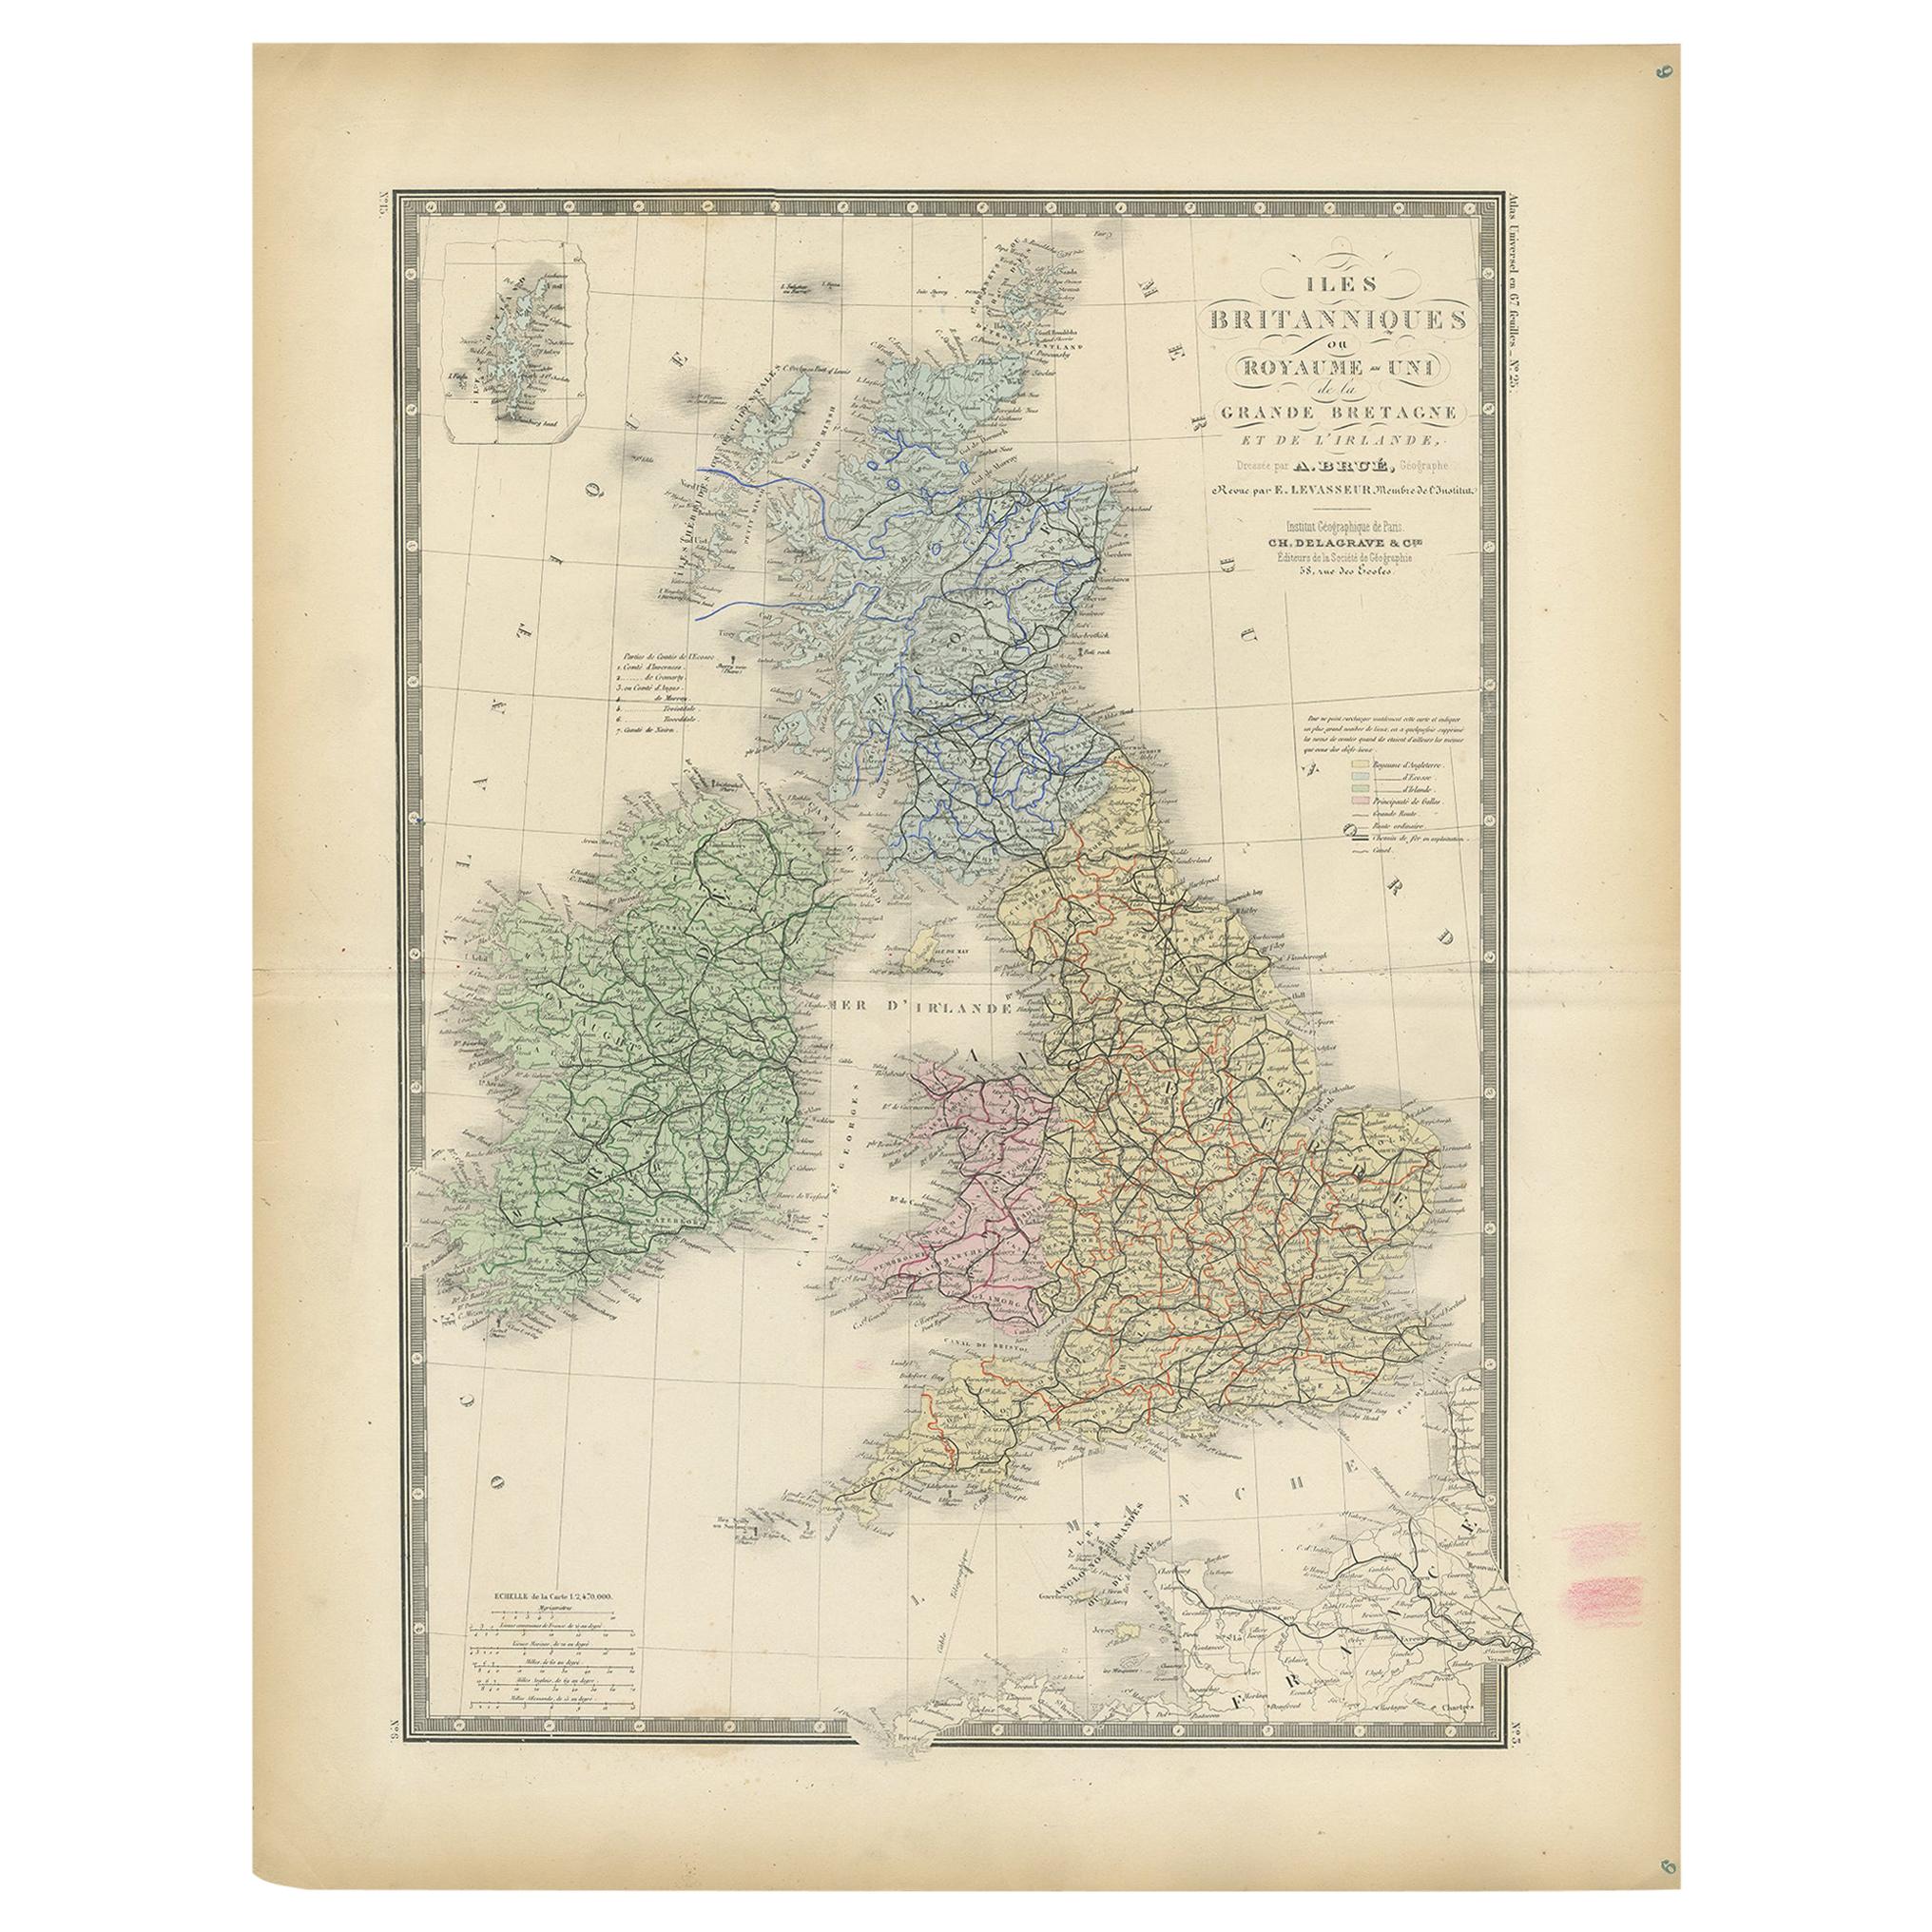 Original Antique Map of the United Kingdom and Ireland, Published in 1875